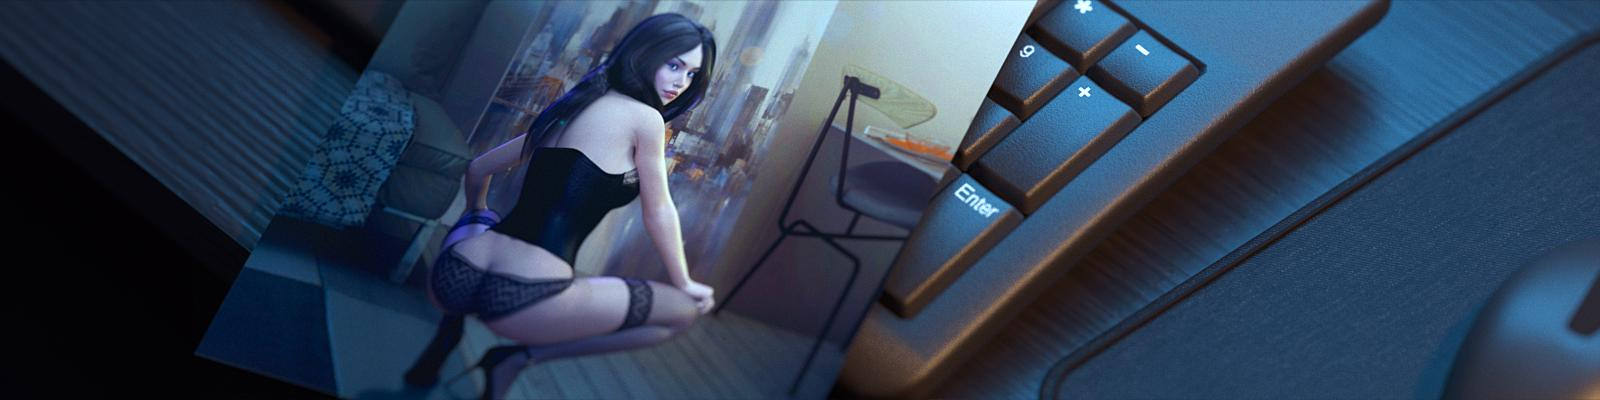 Free computer animated porn - Porn pic